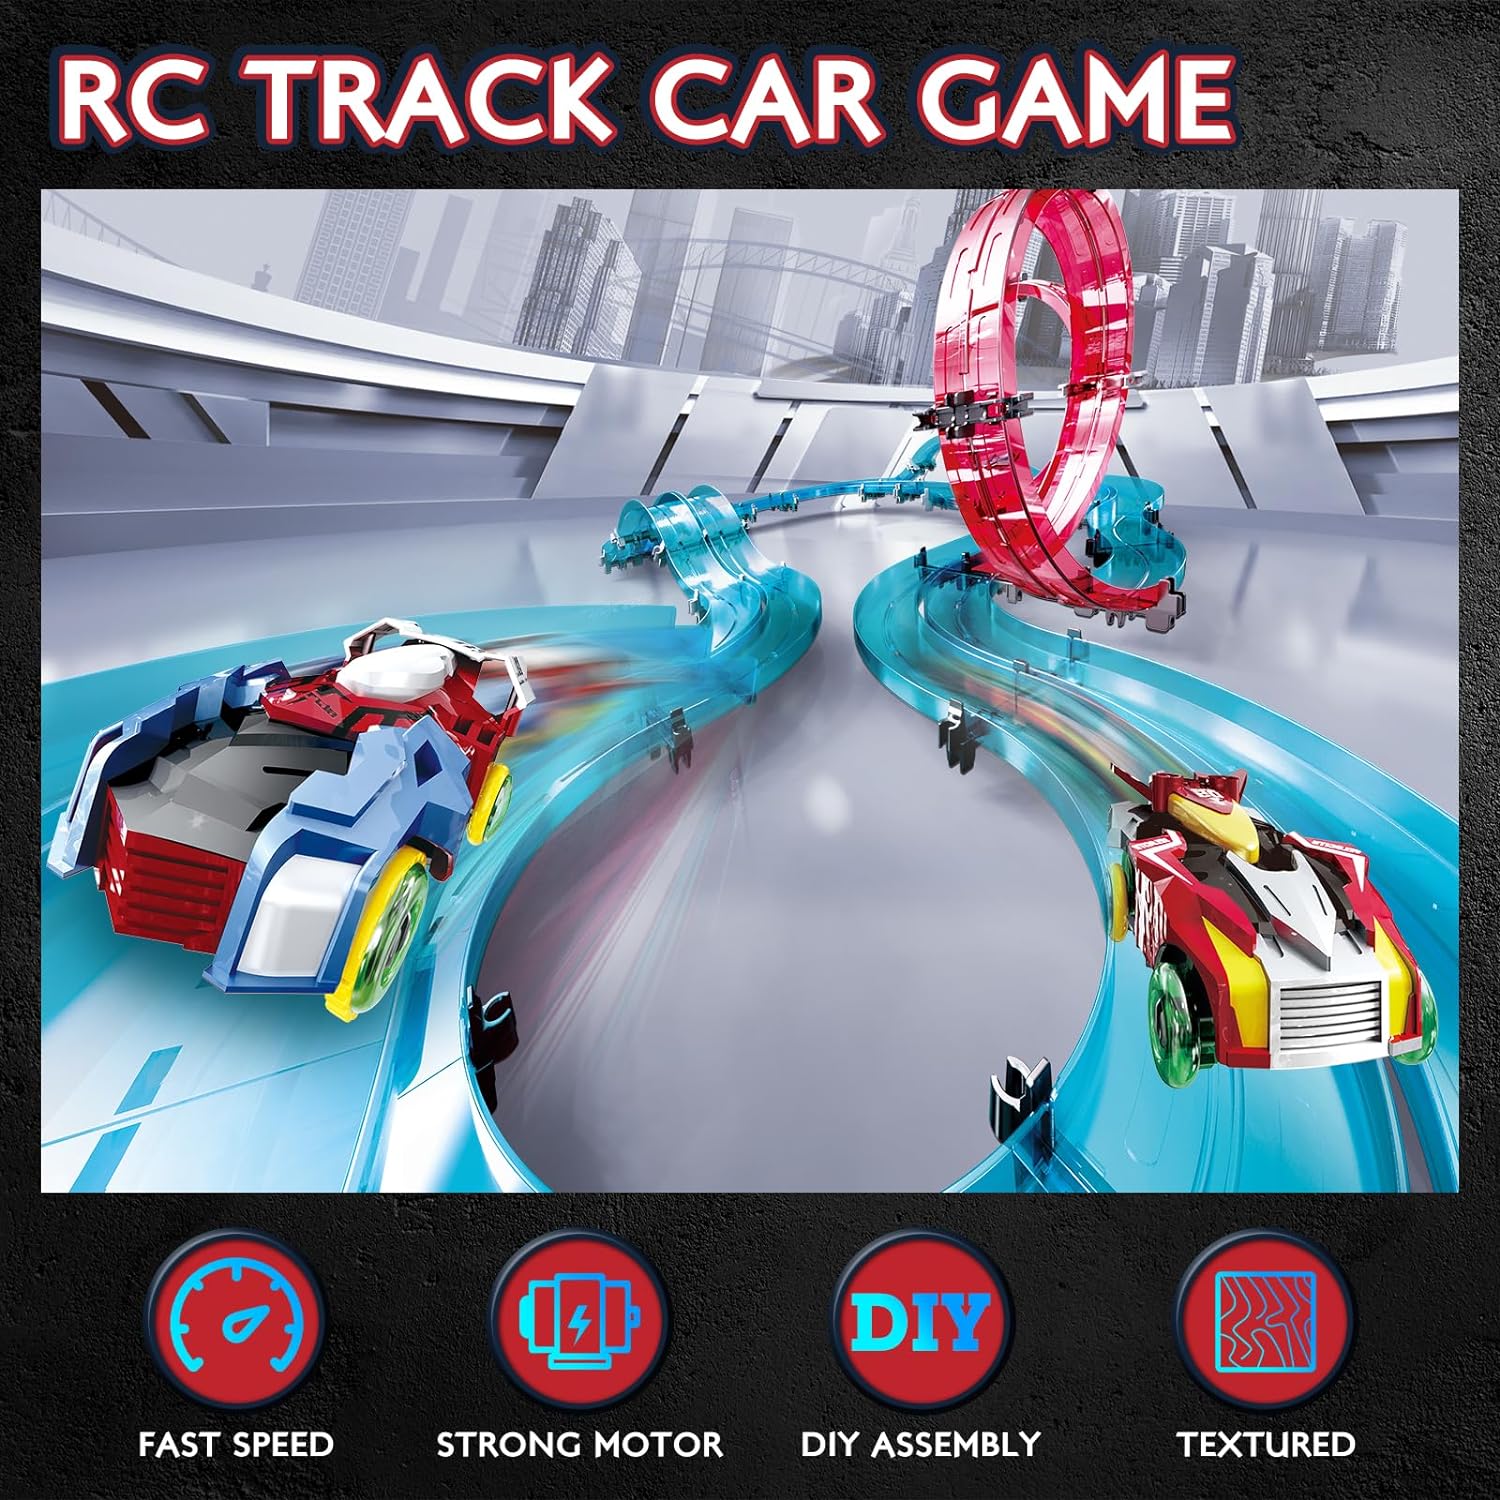 REMOKING RC Track Car, STEM Rail Race RC Track Car Toys Build Your Own 3D Super Track Ultimate Slot Car Playset 2 Cars 2 Remote Controllers Party Game, Great Gifts Toys for Kids Boys Girls Age 6 7 8 9 : Toys  Games